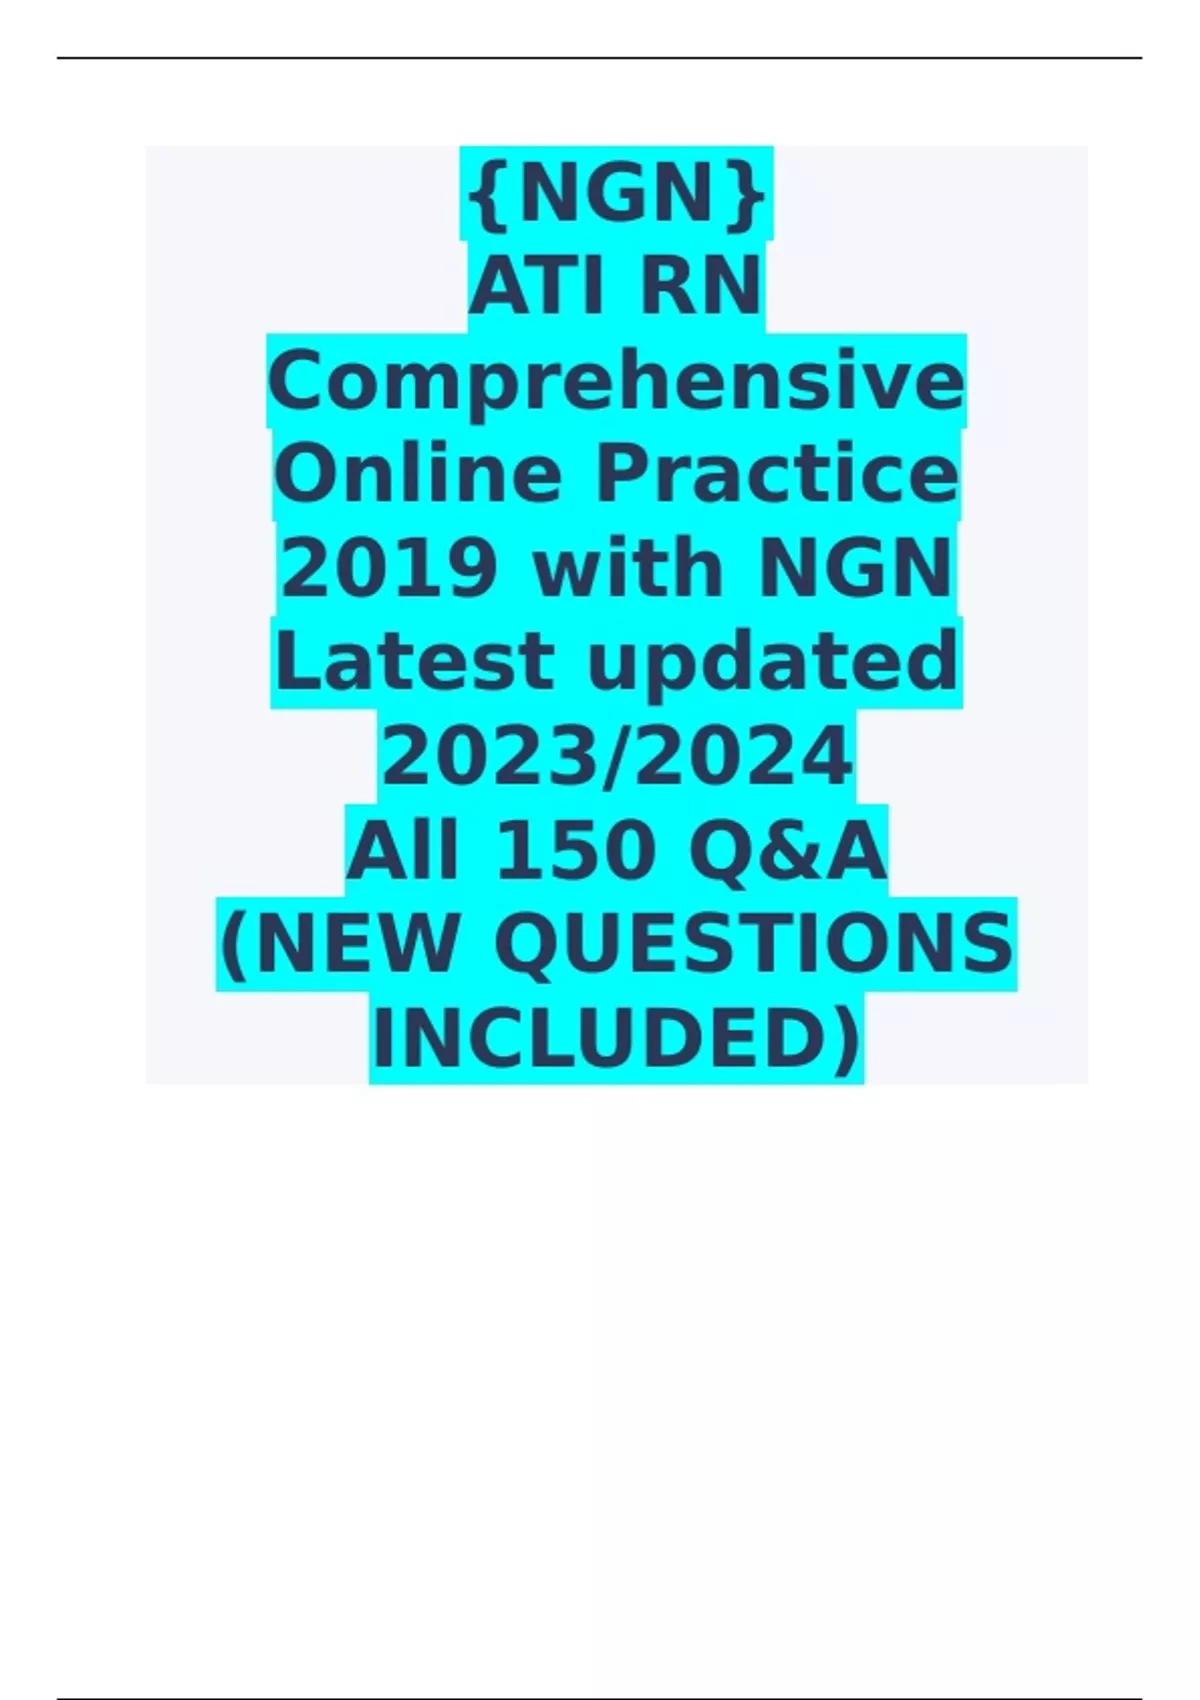 {NGN} ATI RN Comprehensive Online Practice 2019 with NGN Latest updated